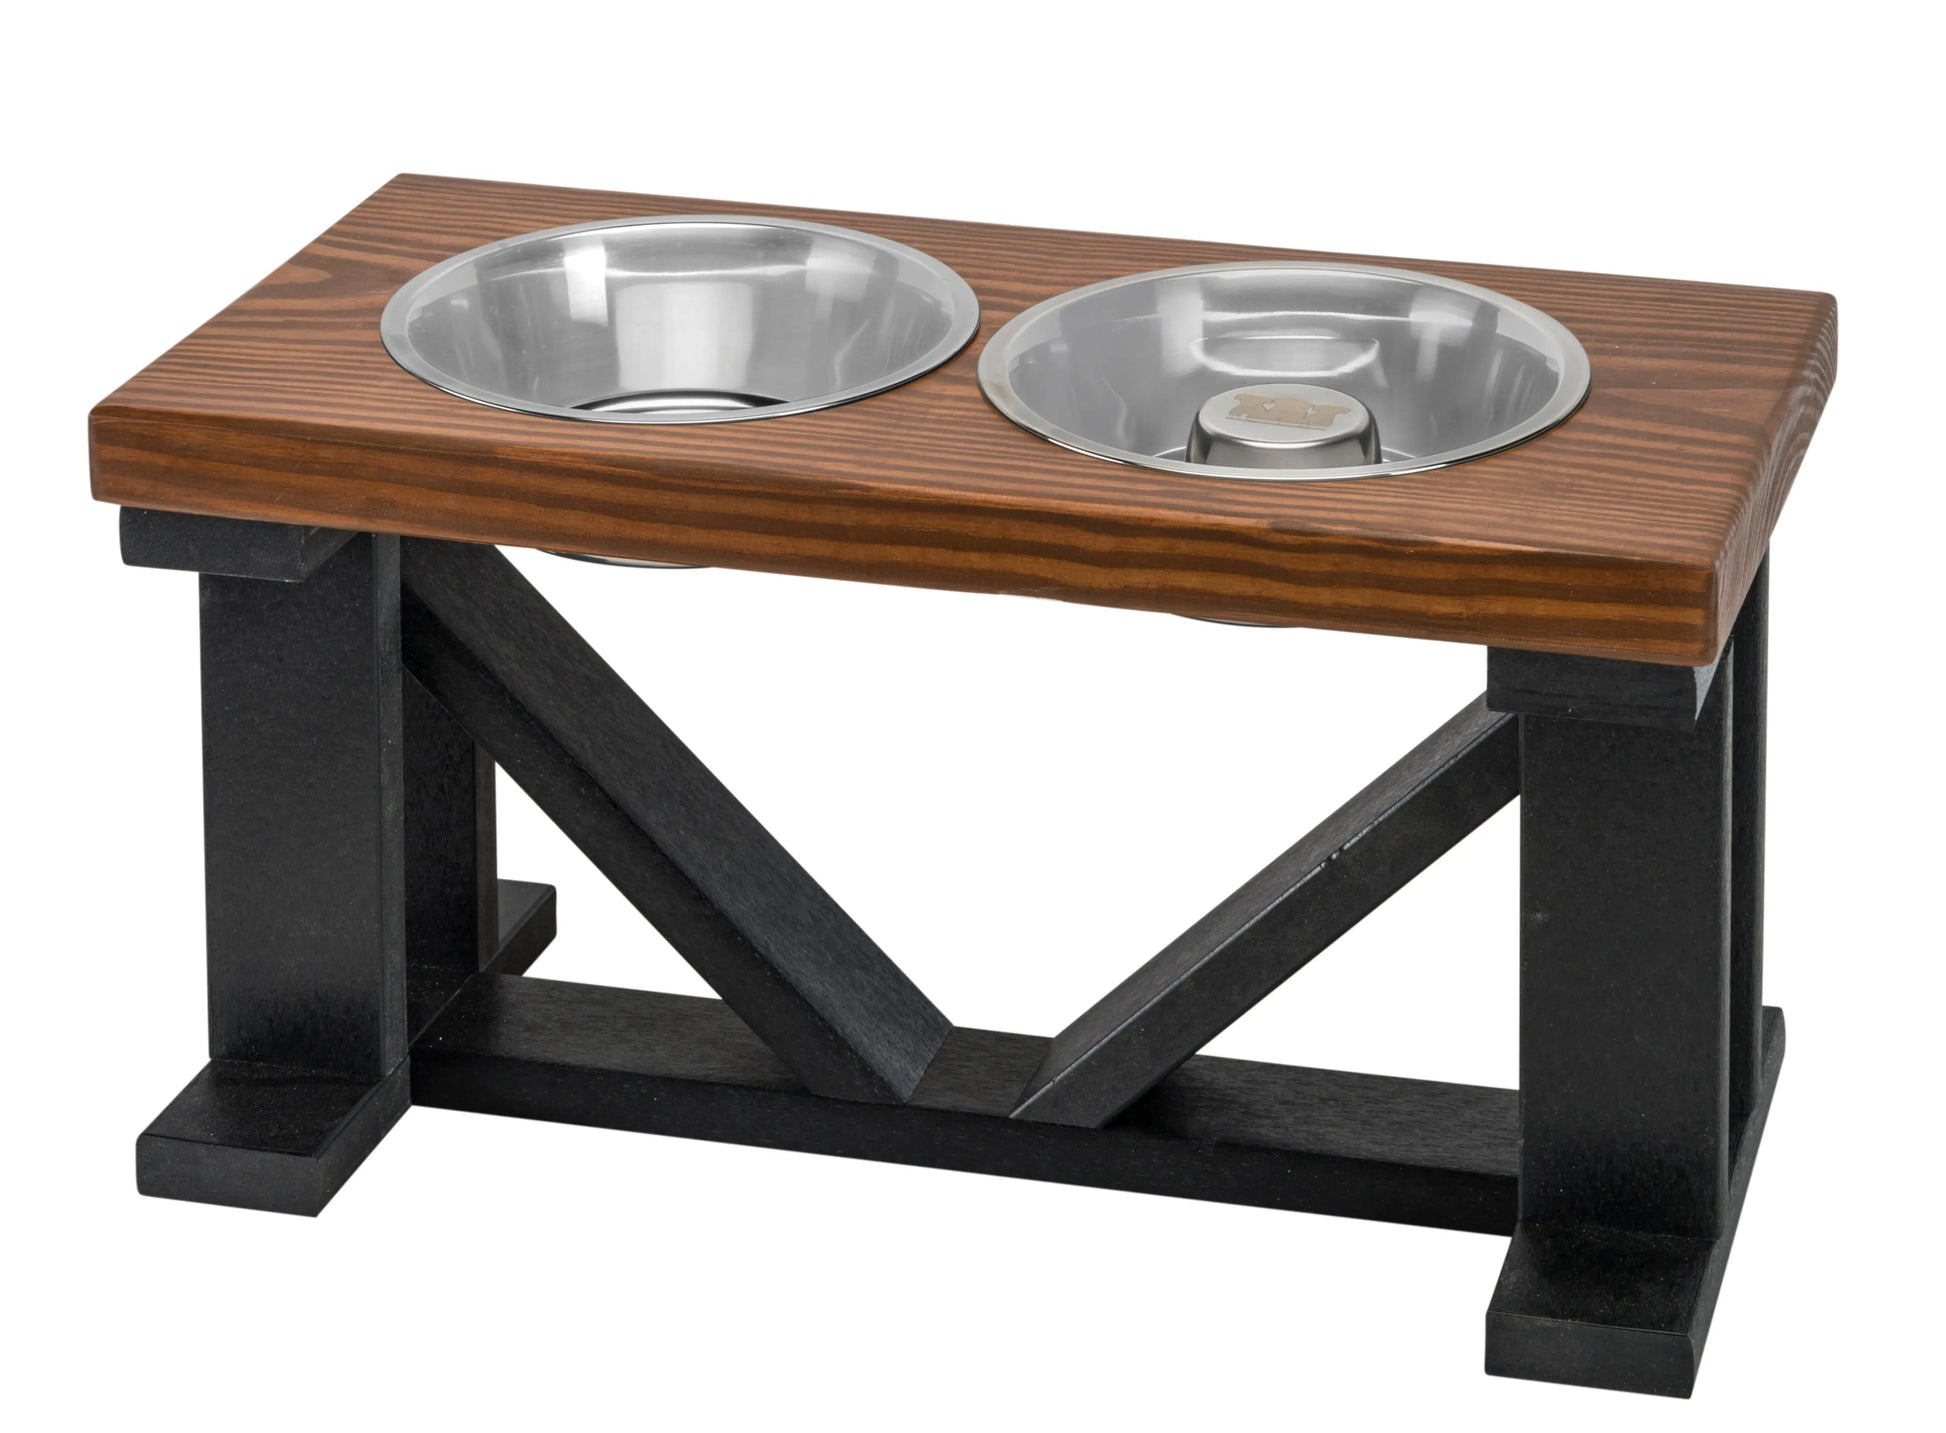 Dog Bowls Elevated Wood Raised Dog Bowl Stand With Double Bowls Raised  Feeder